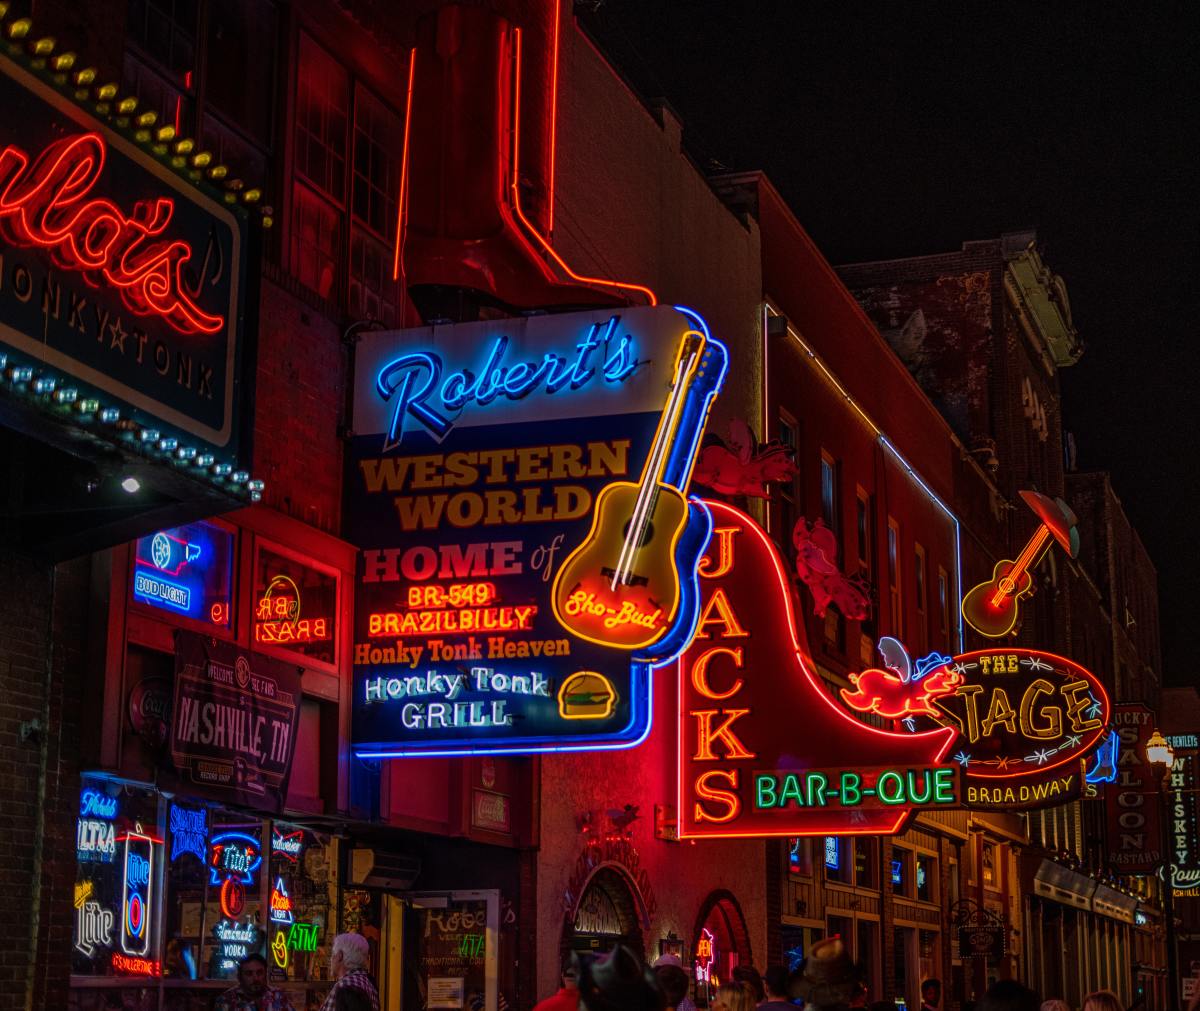 10 of the Best Nashville Bars on Lower Broadway (Honky Tonk Row)